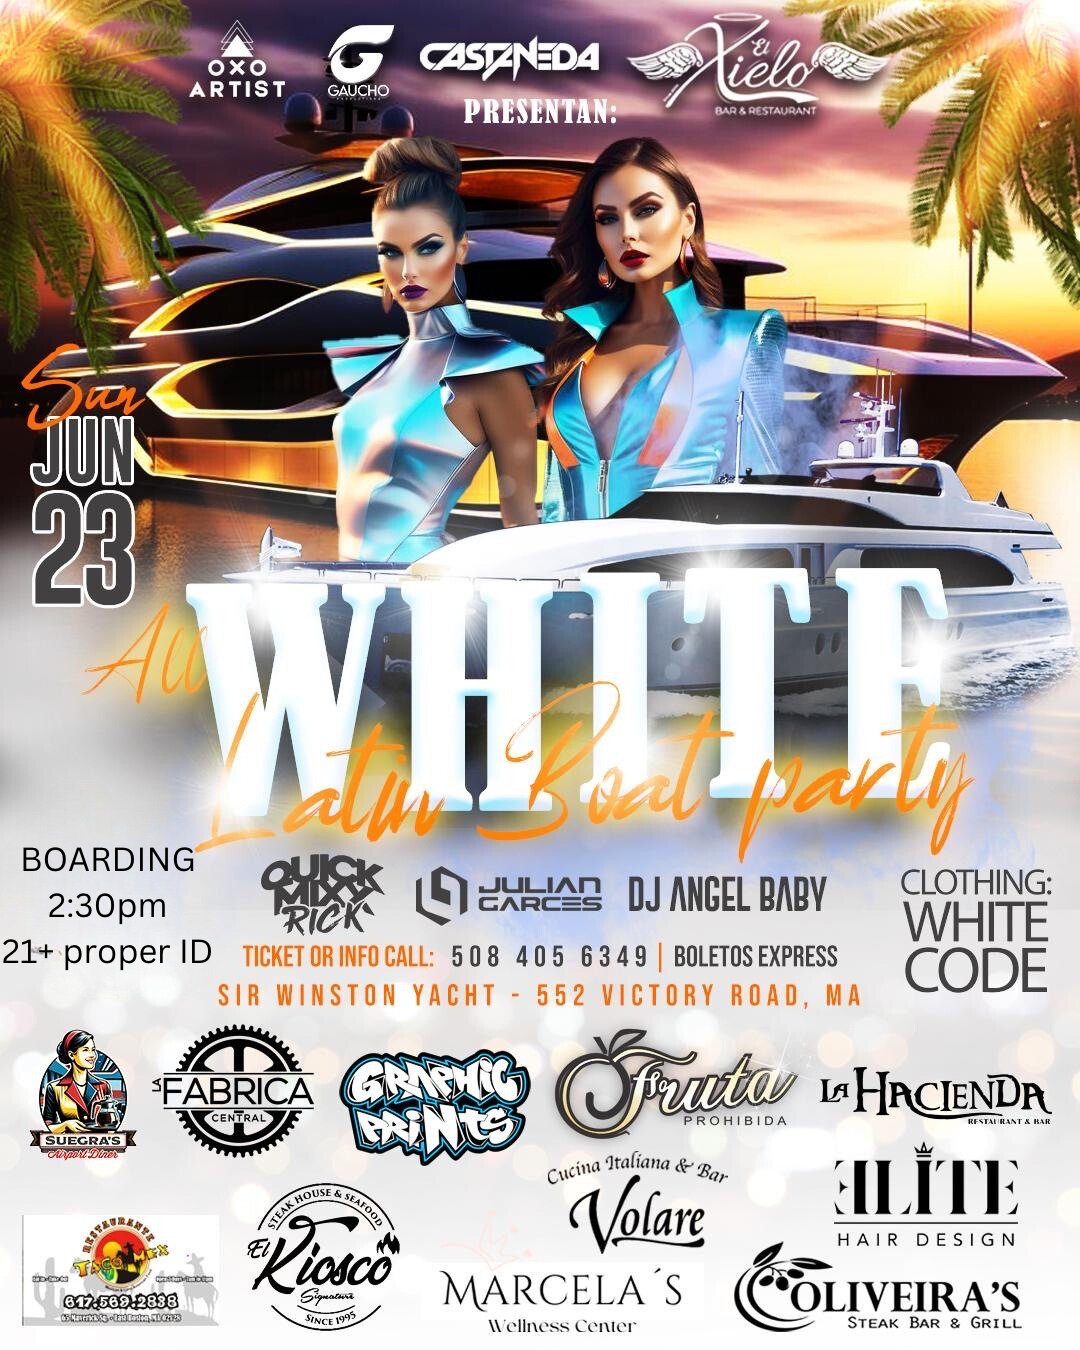 ALL WHITE LATIN BOAT PARTY